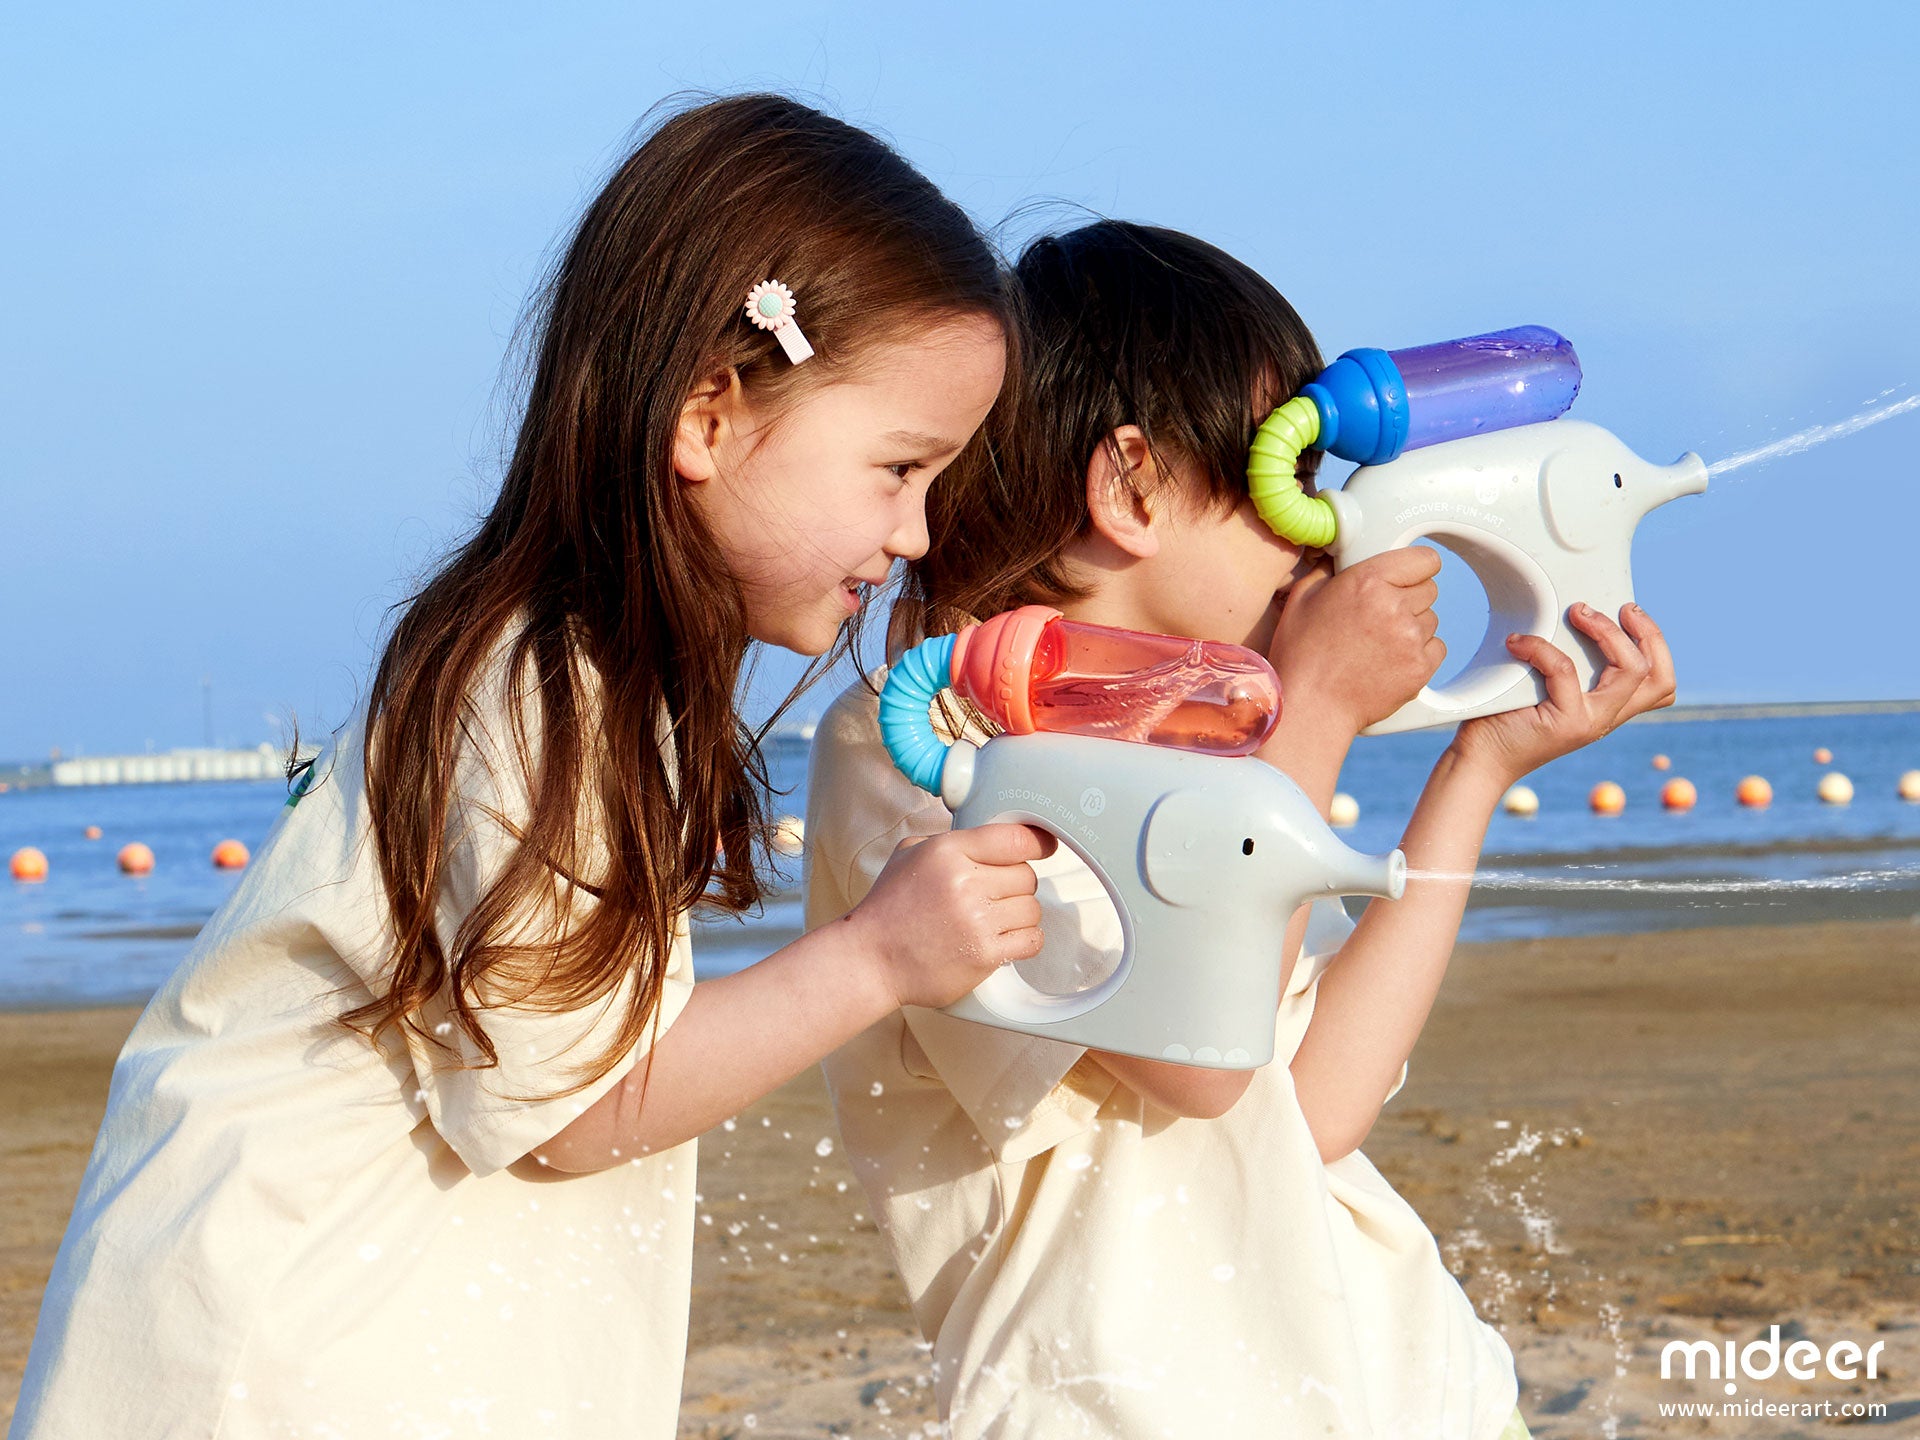 Celebrating Memorial Day and Welcoming Summer with Fun Children’s Toys